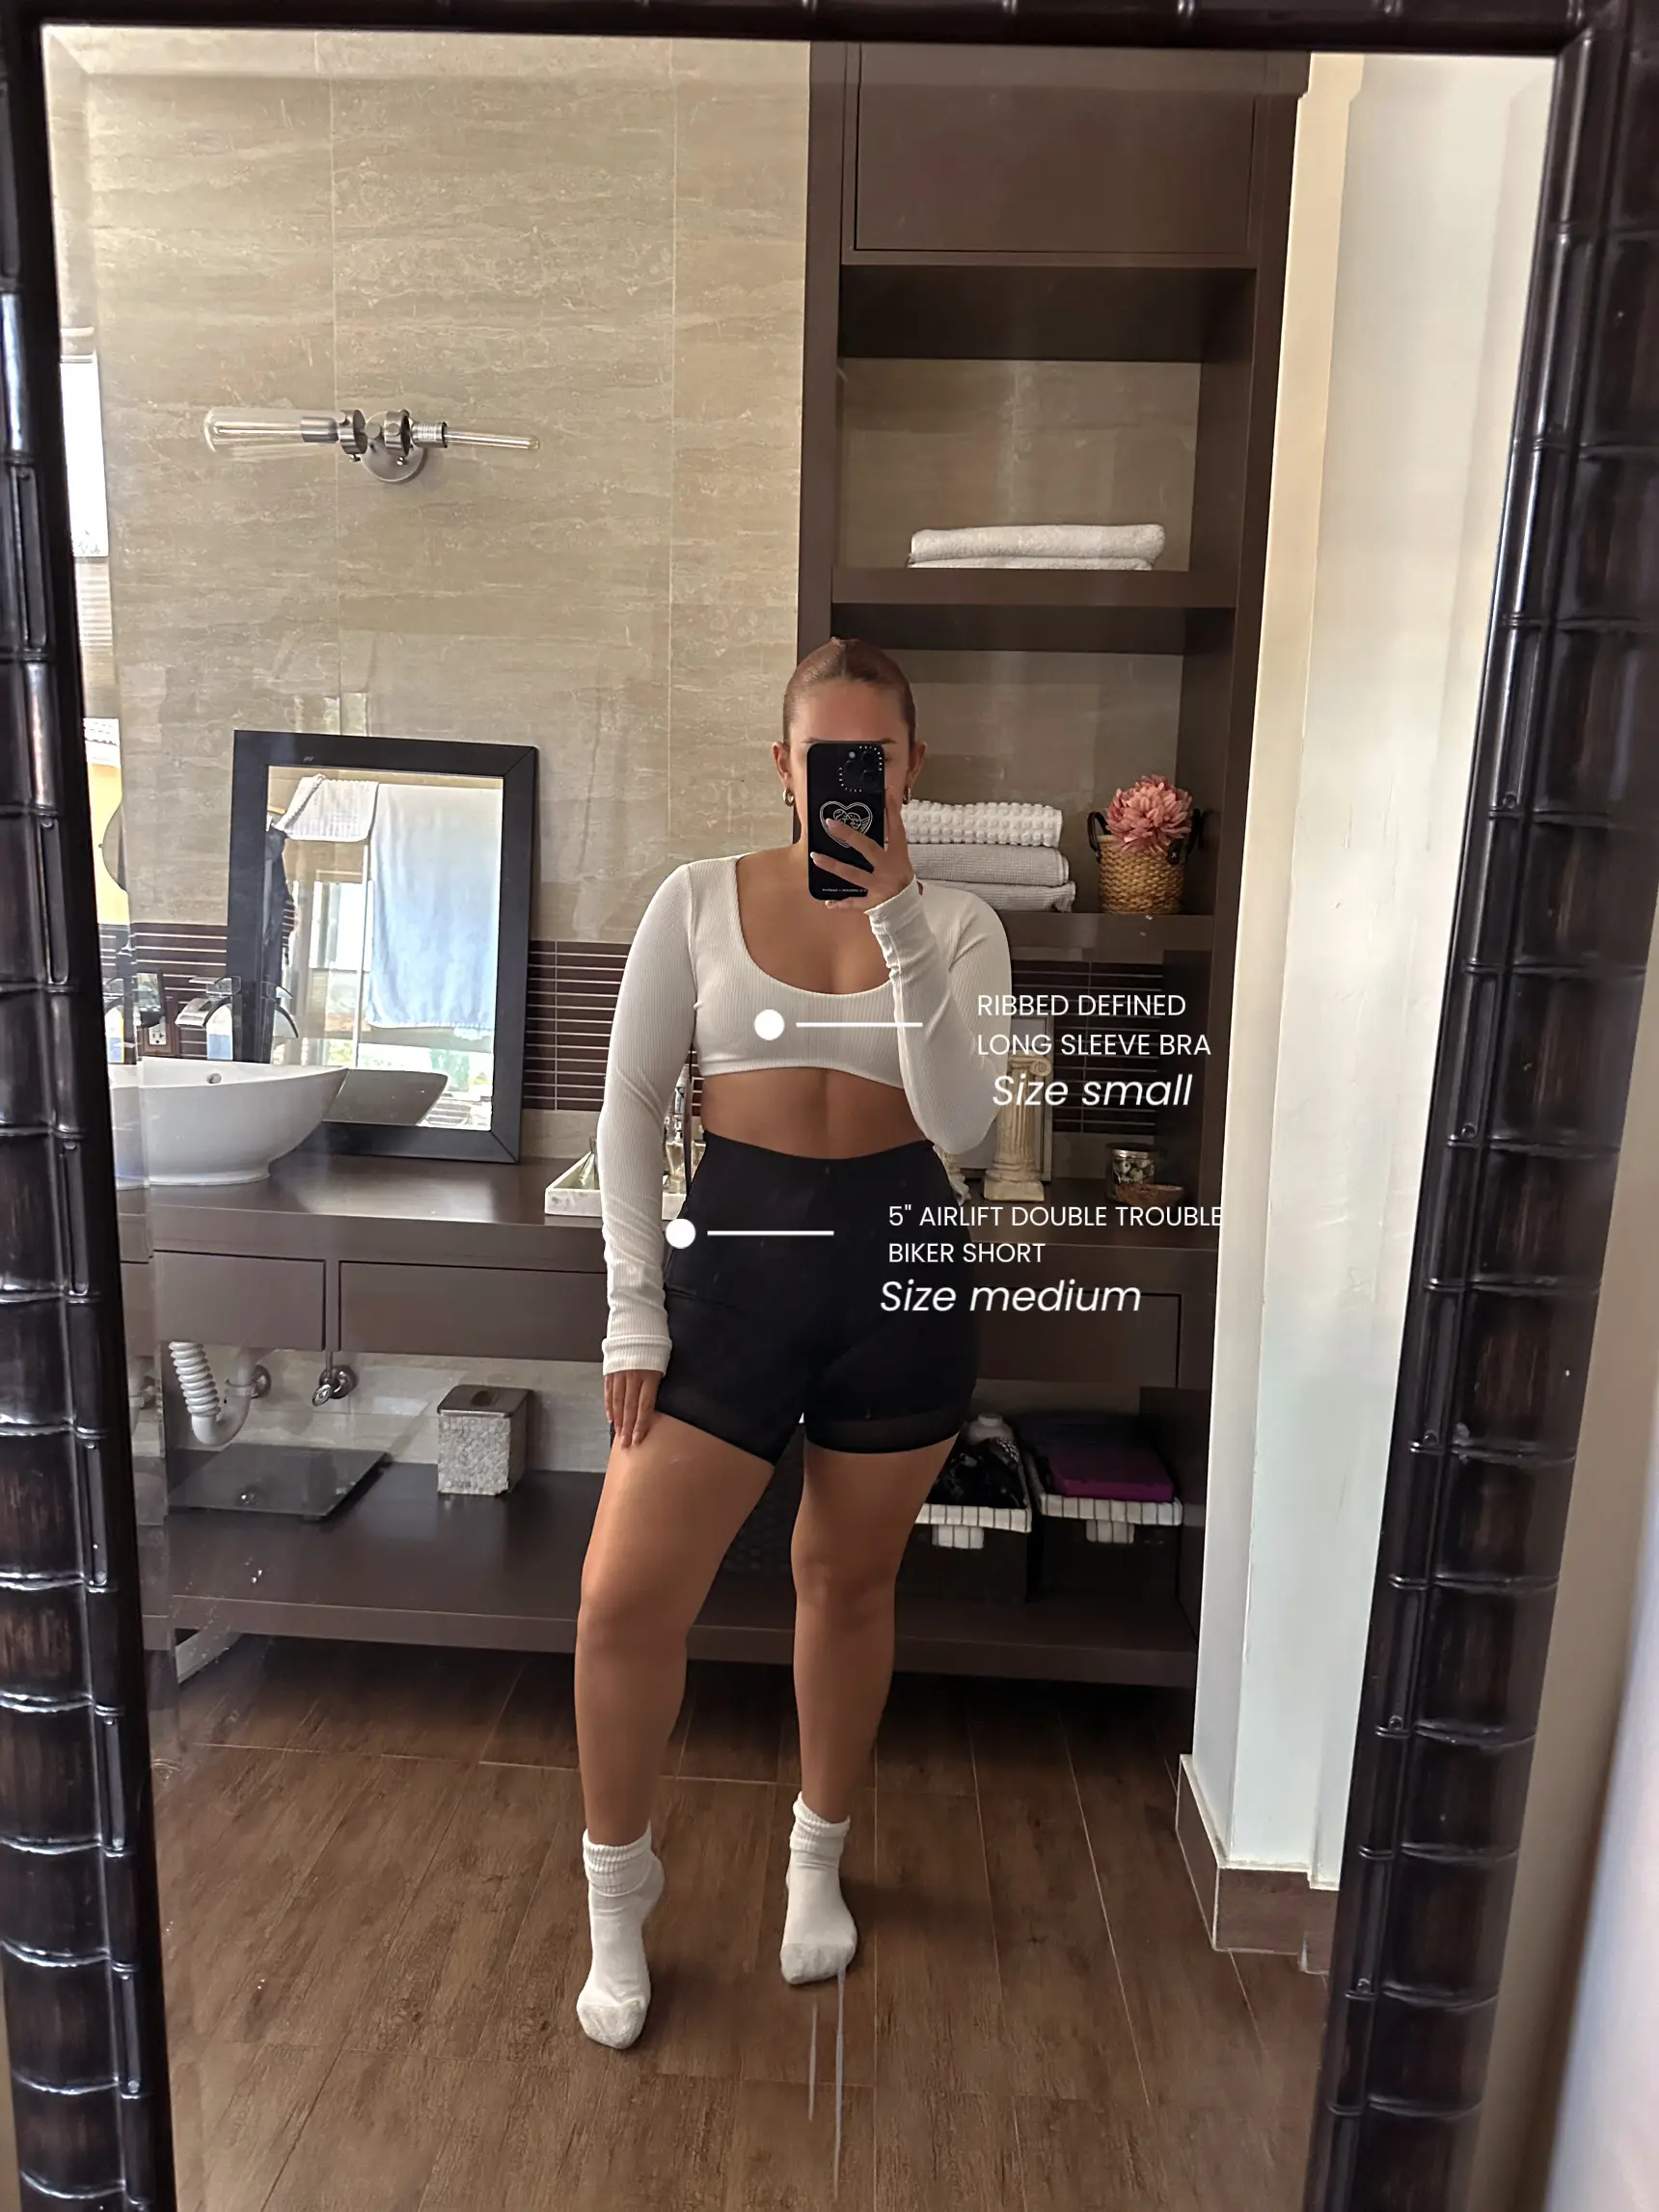 ALO YOGA TRY ON HAUL, Gallery posted by Kaylee 🤍